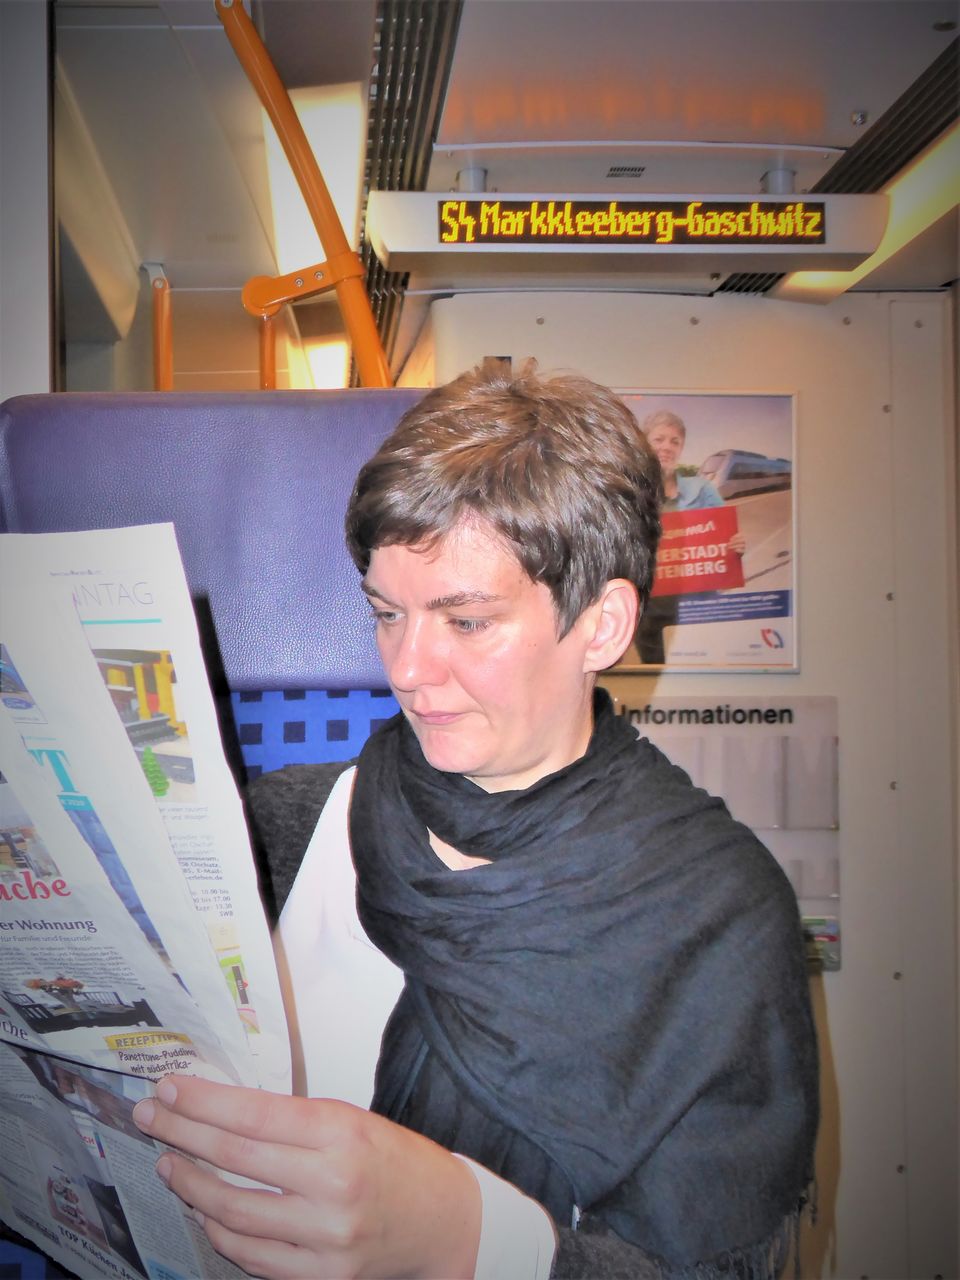 Woman reading newspaper while sitting in train